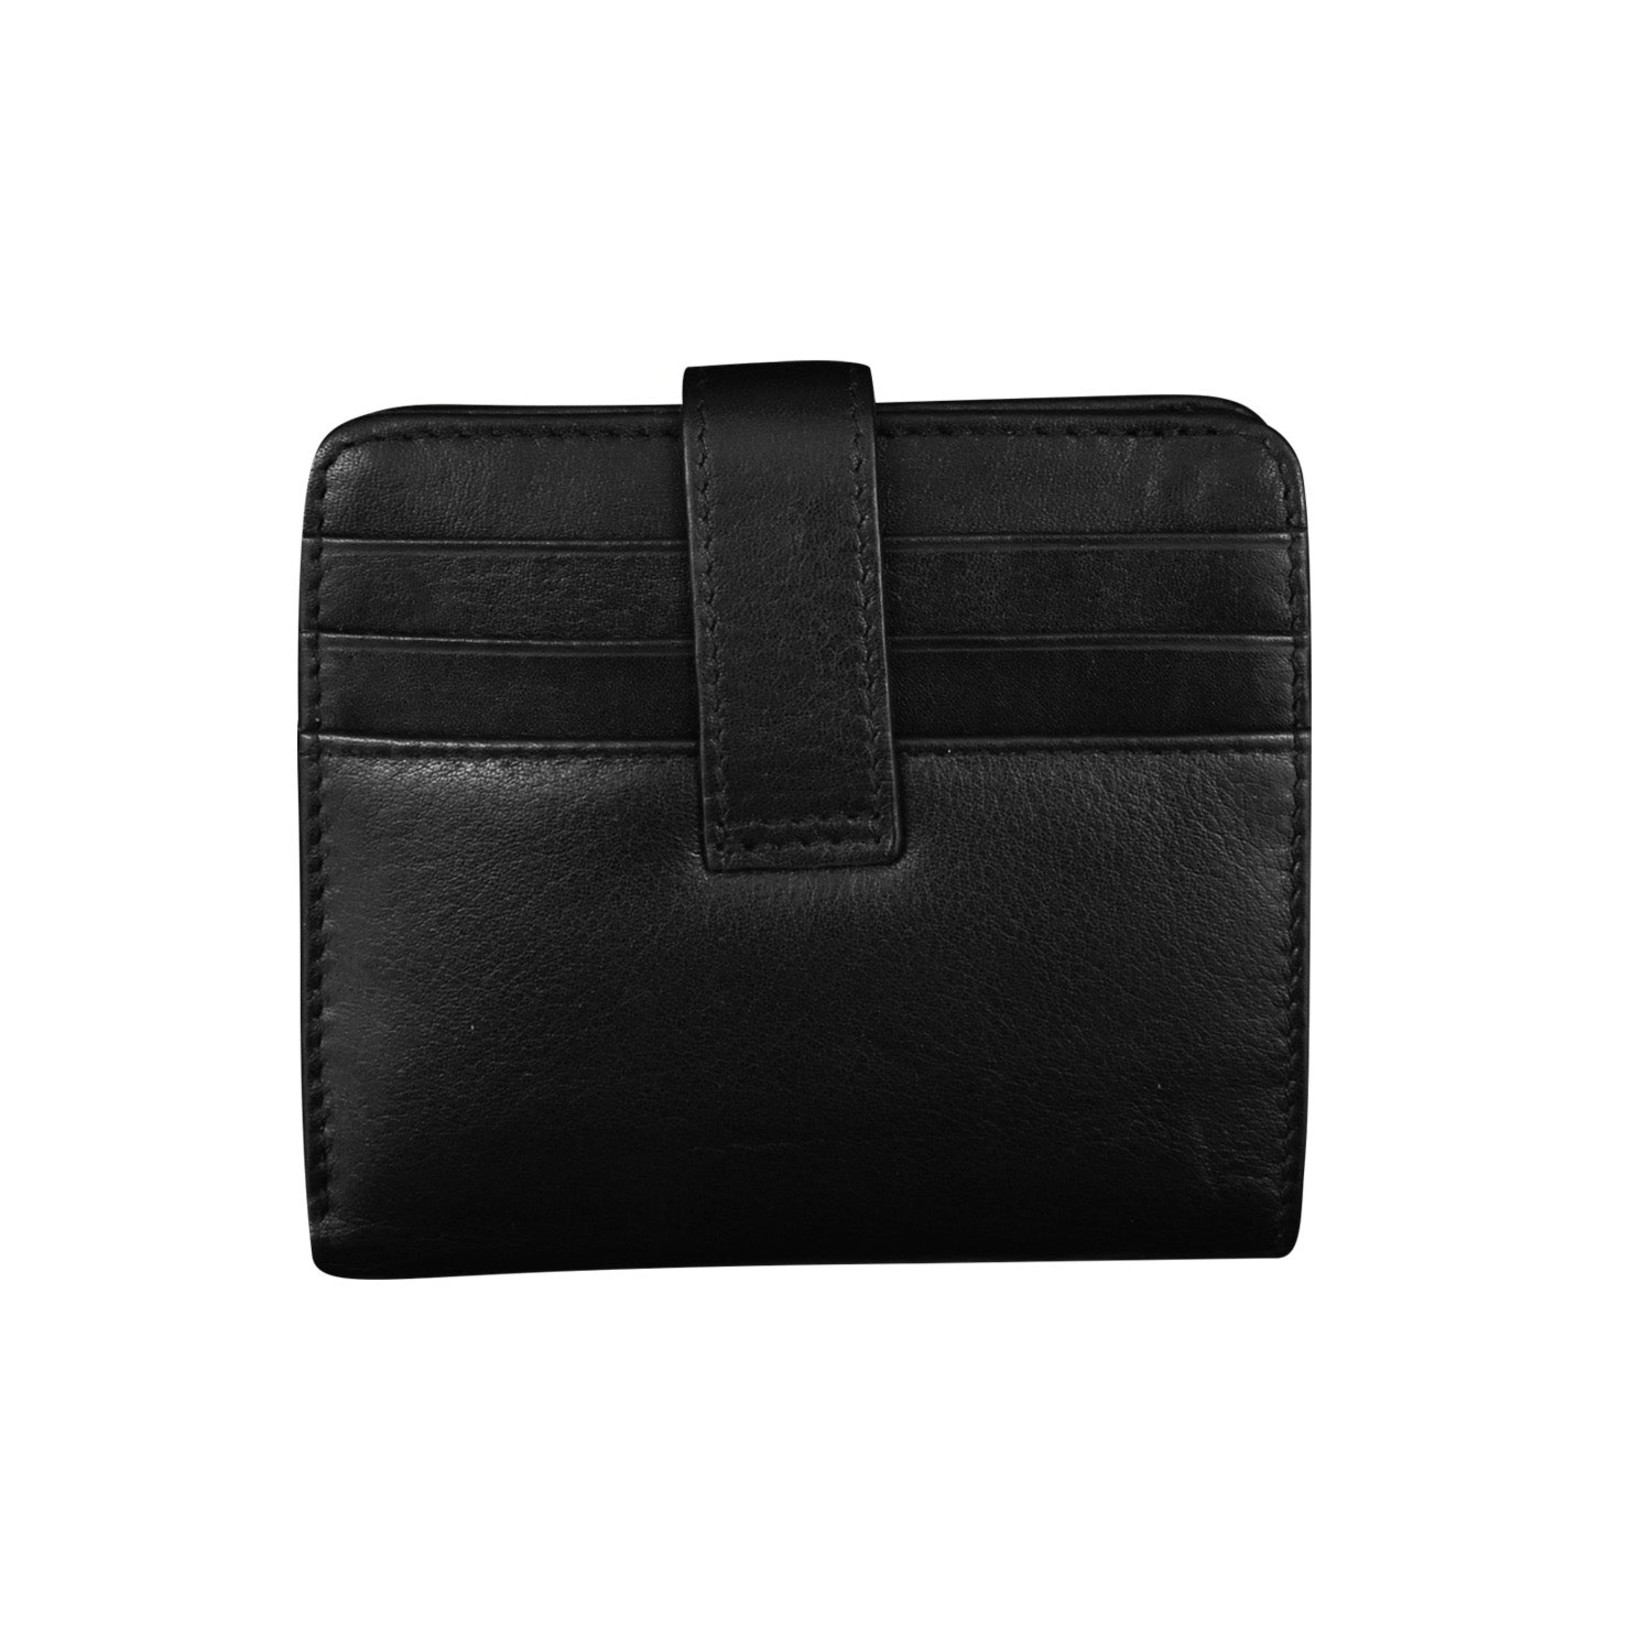 Leather Handbags and Accessories 7301 Black - RFID Small Wallet